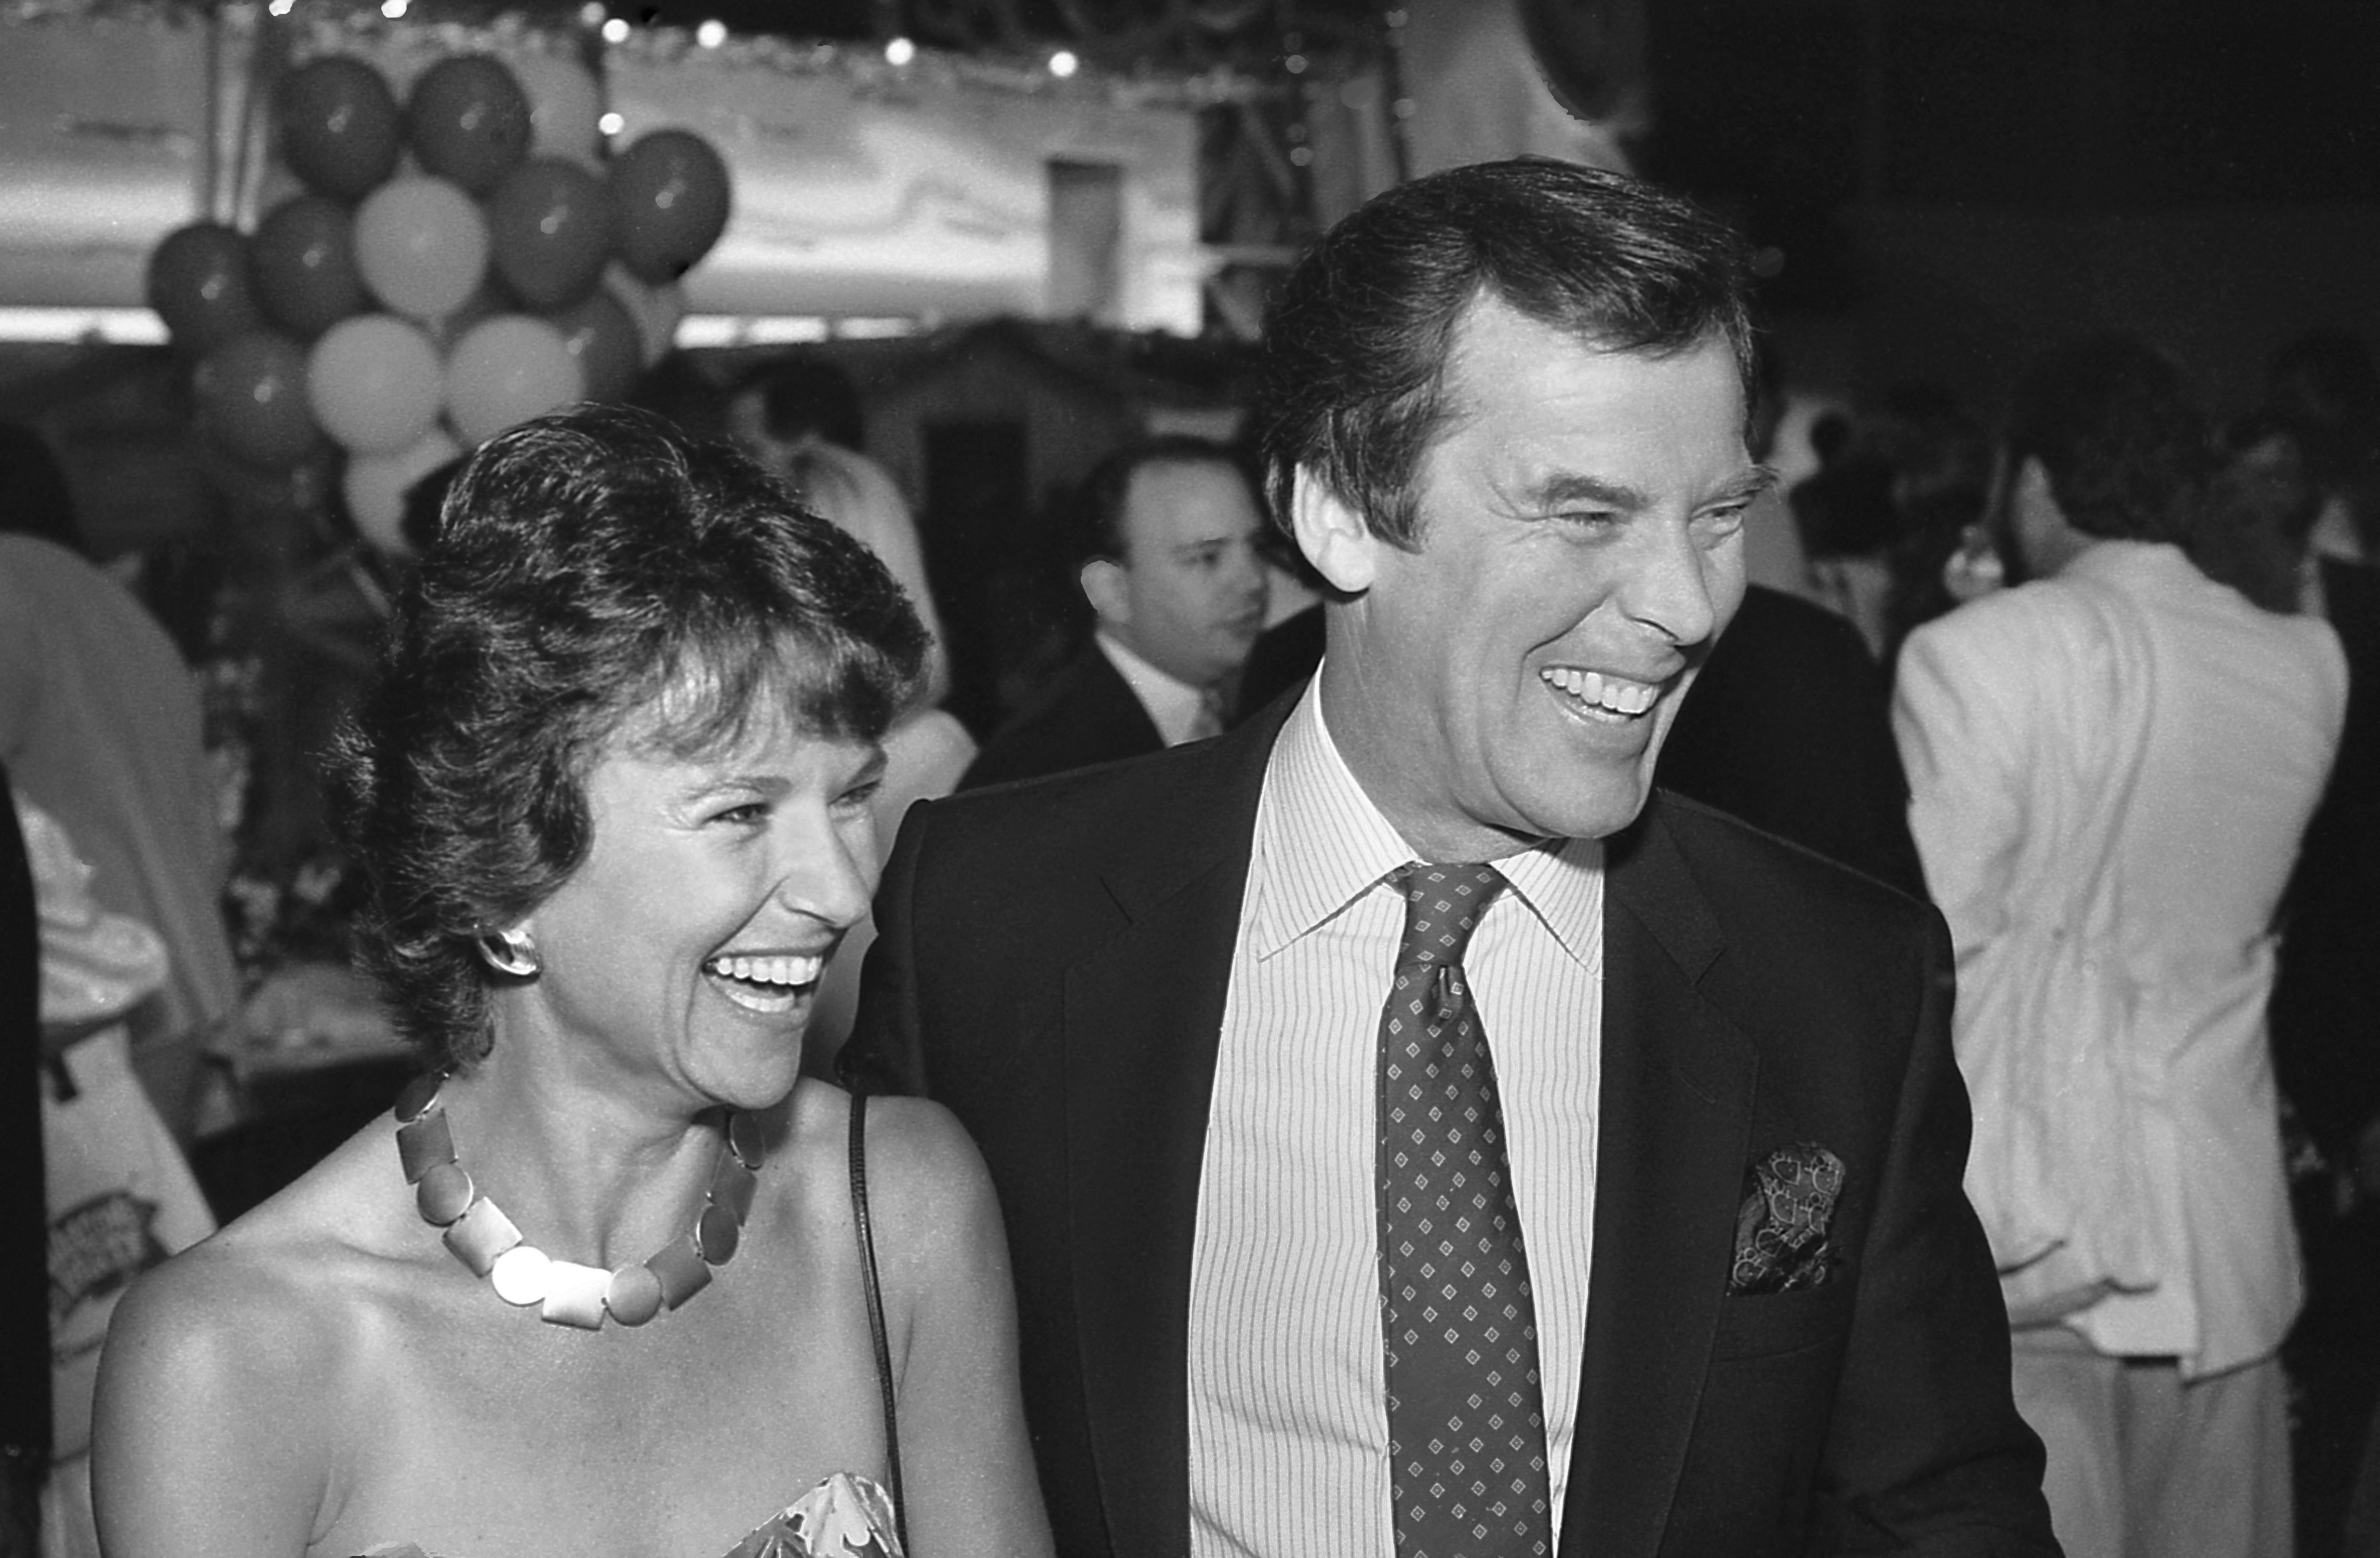 Photo shows married journalists Kati Marton and Peter Jennings during the 1988 Republican National Convention,